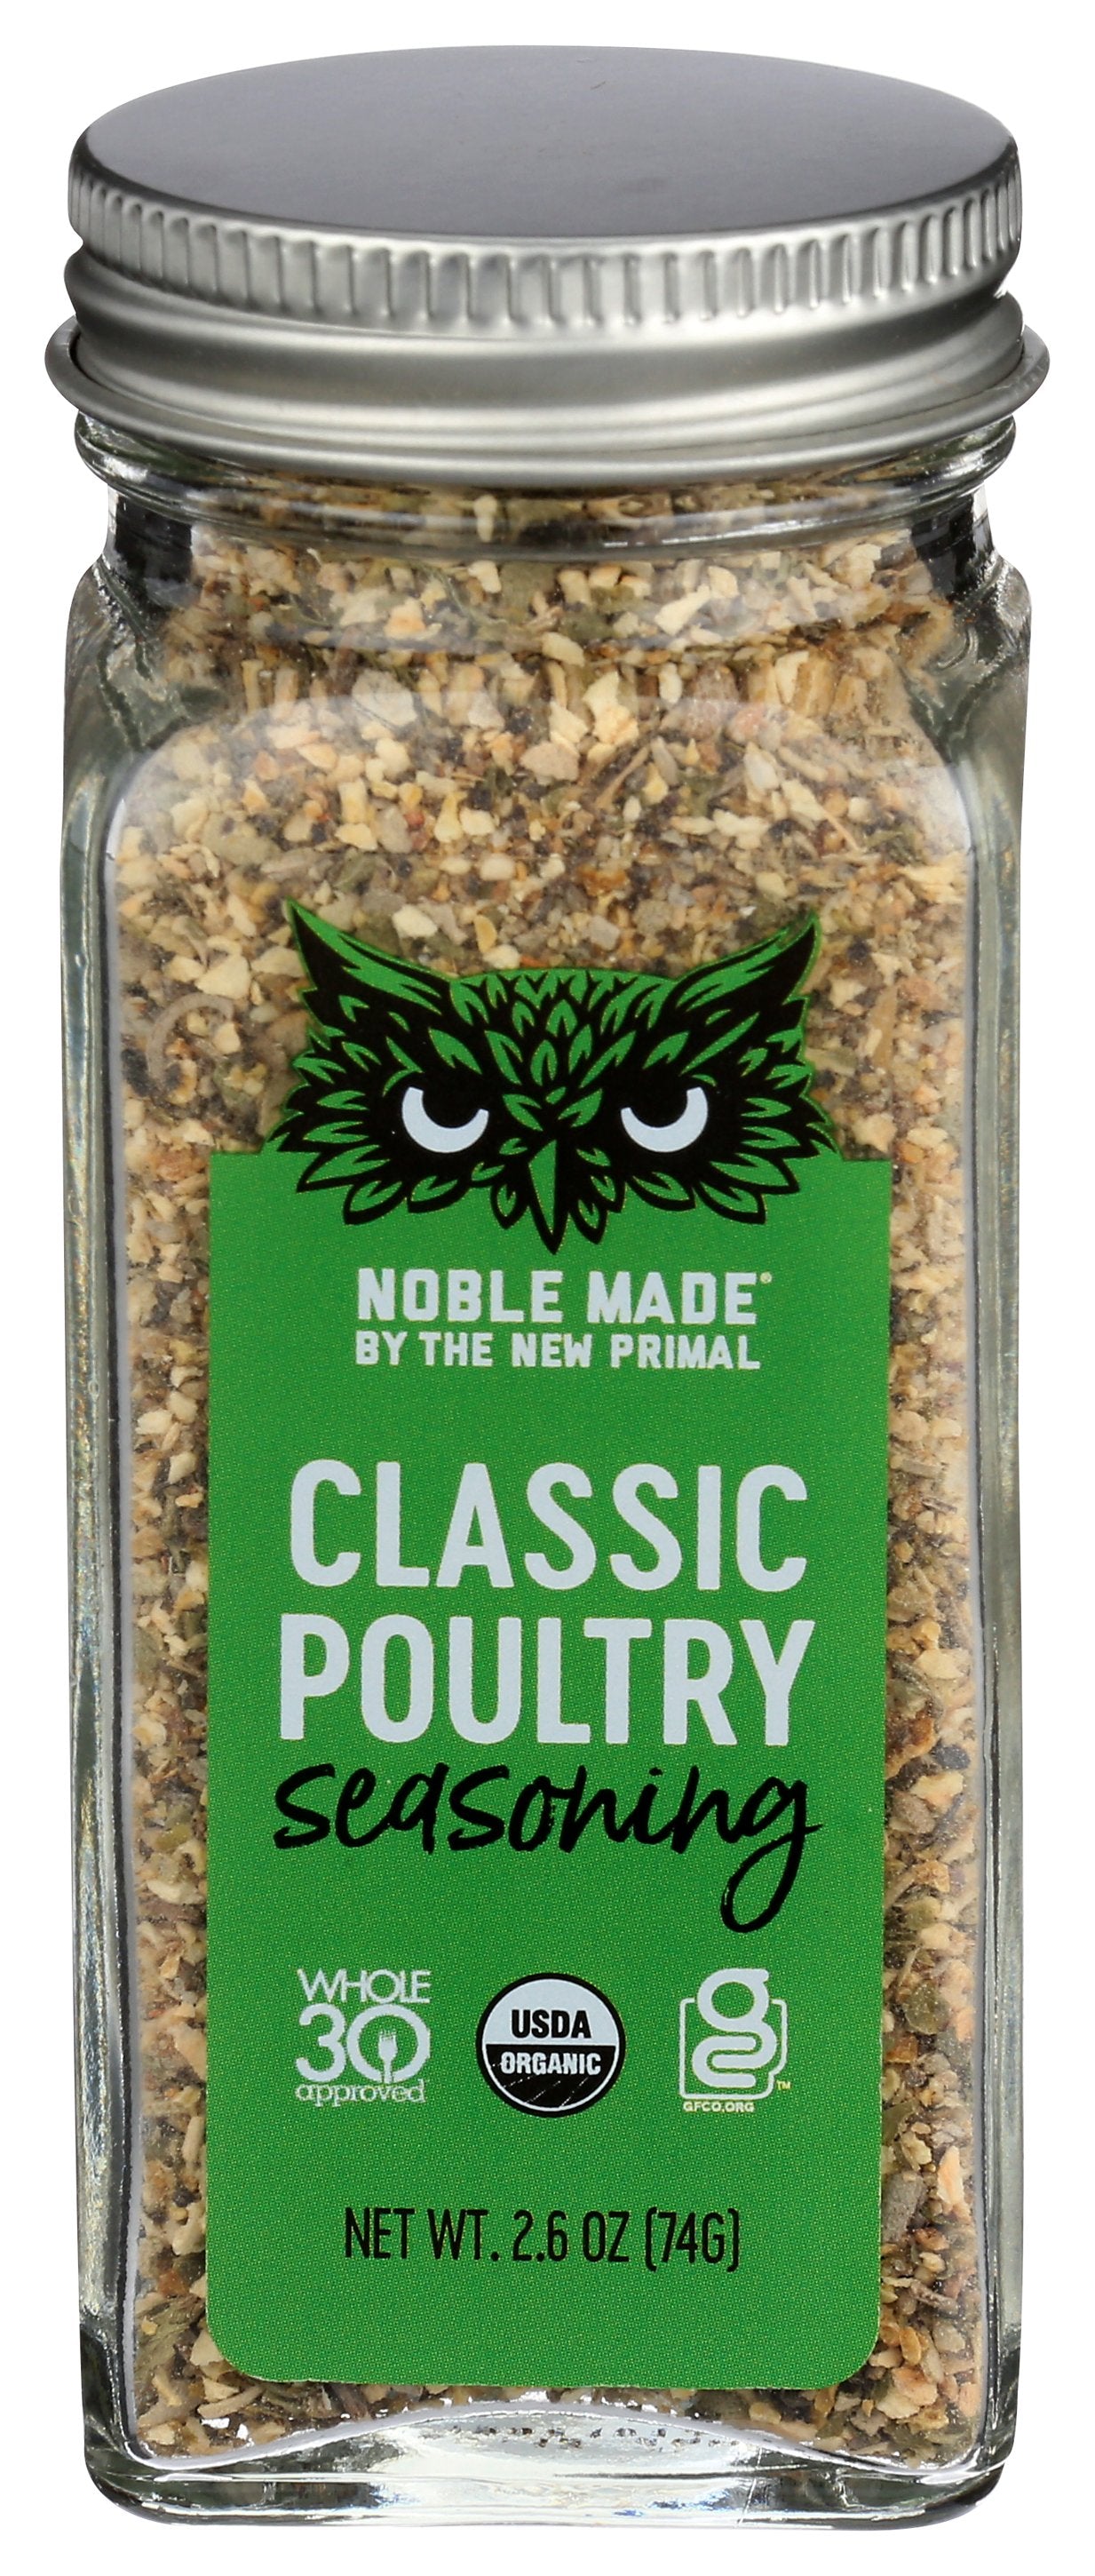 THE NEW PRIMAL SEASON NOBL MADE POULTRY - Case of 6